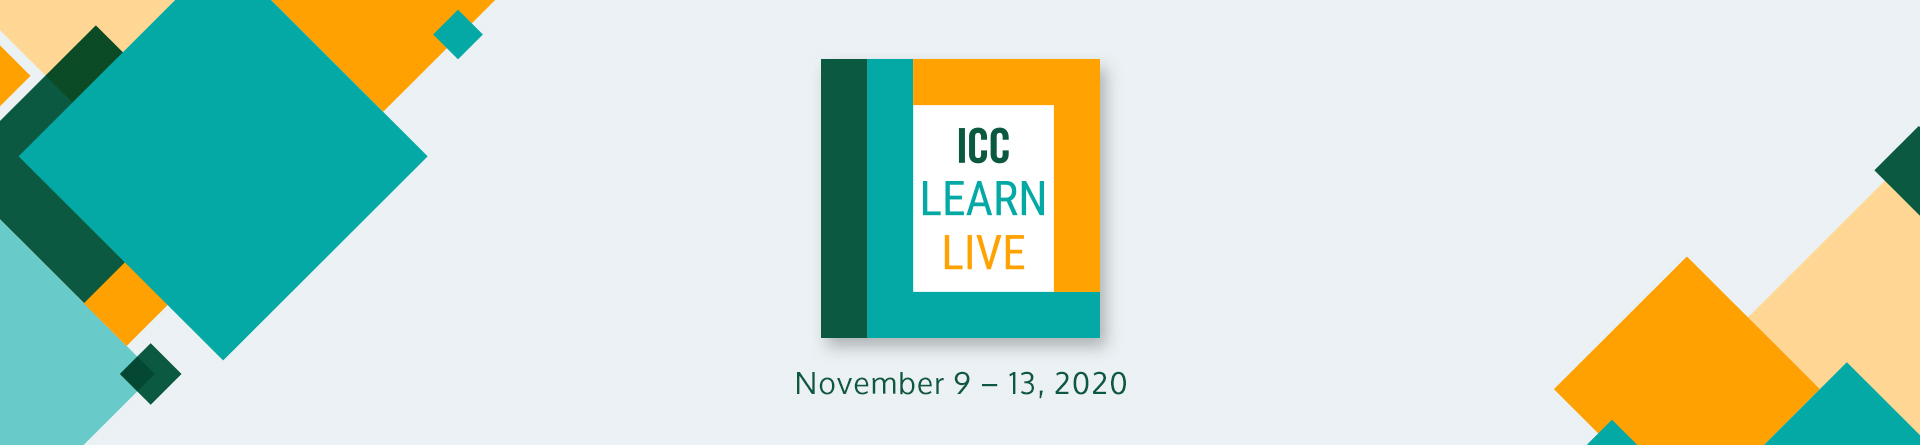 ICC Learn Live Speakers